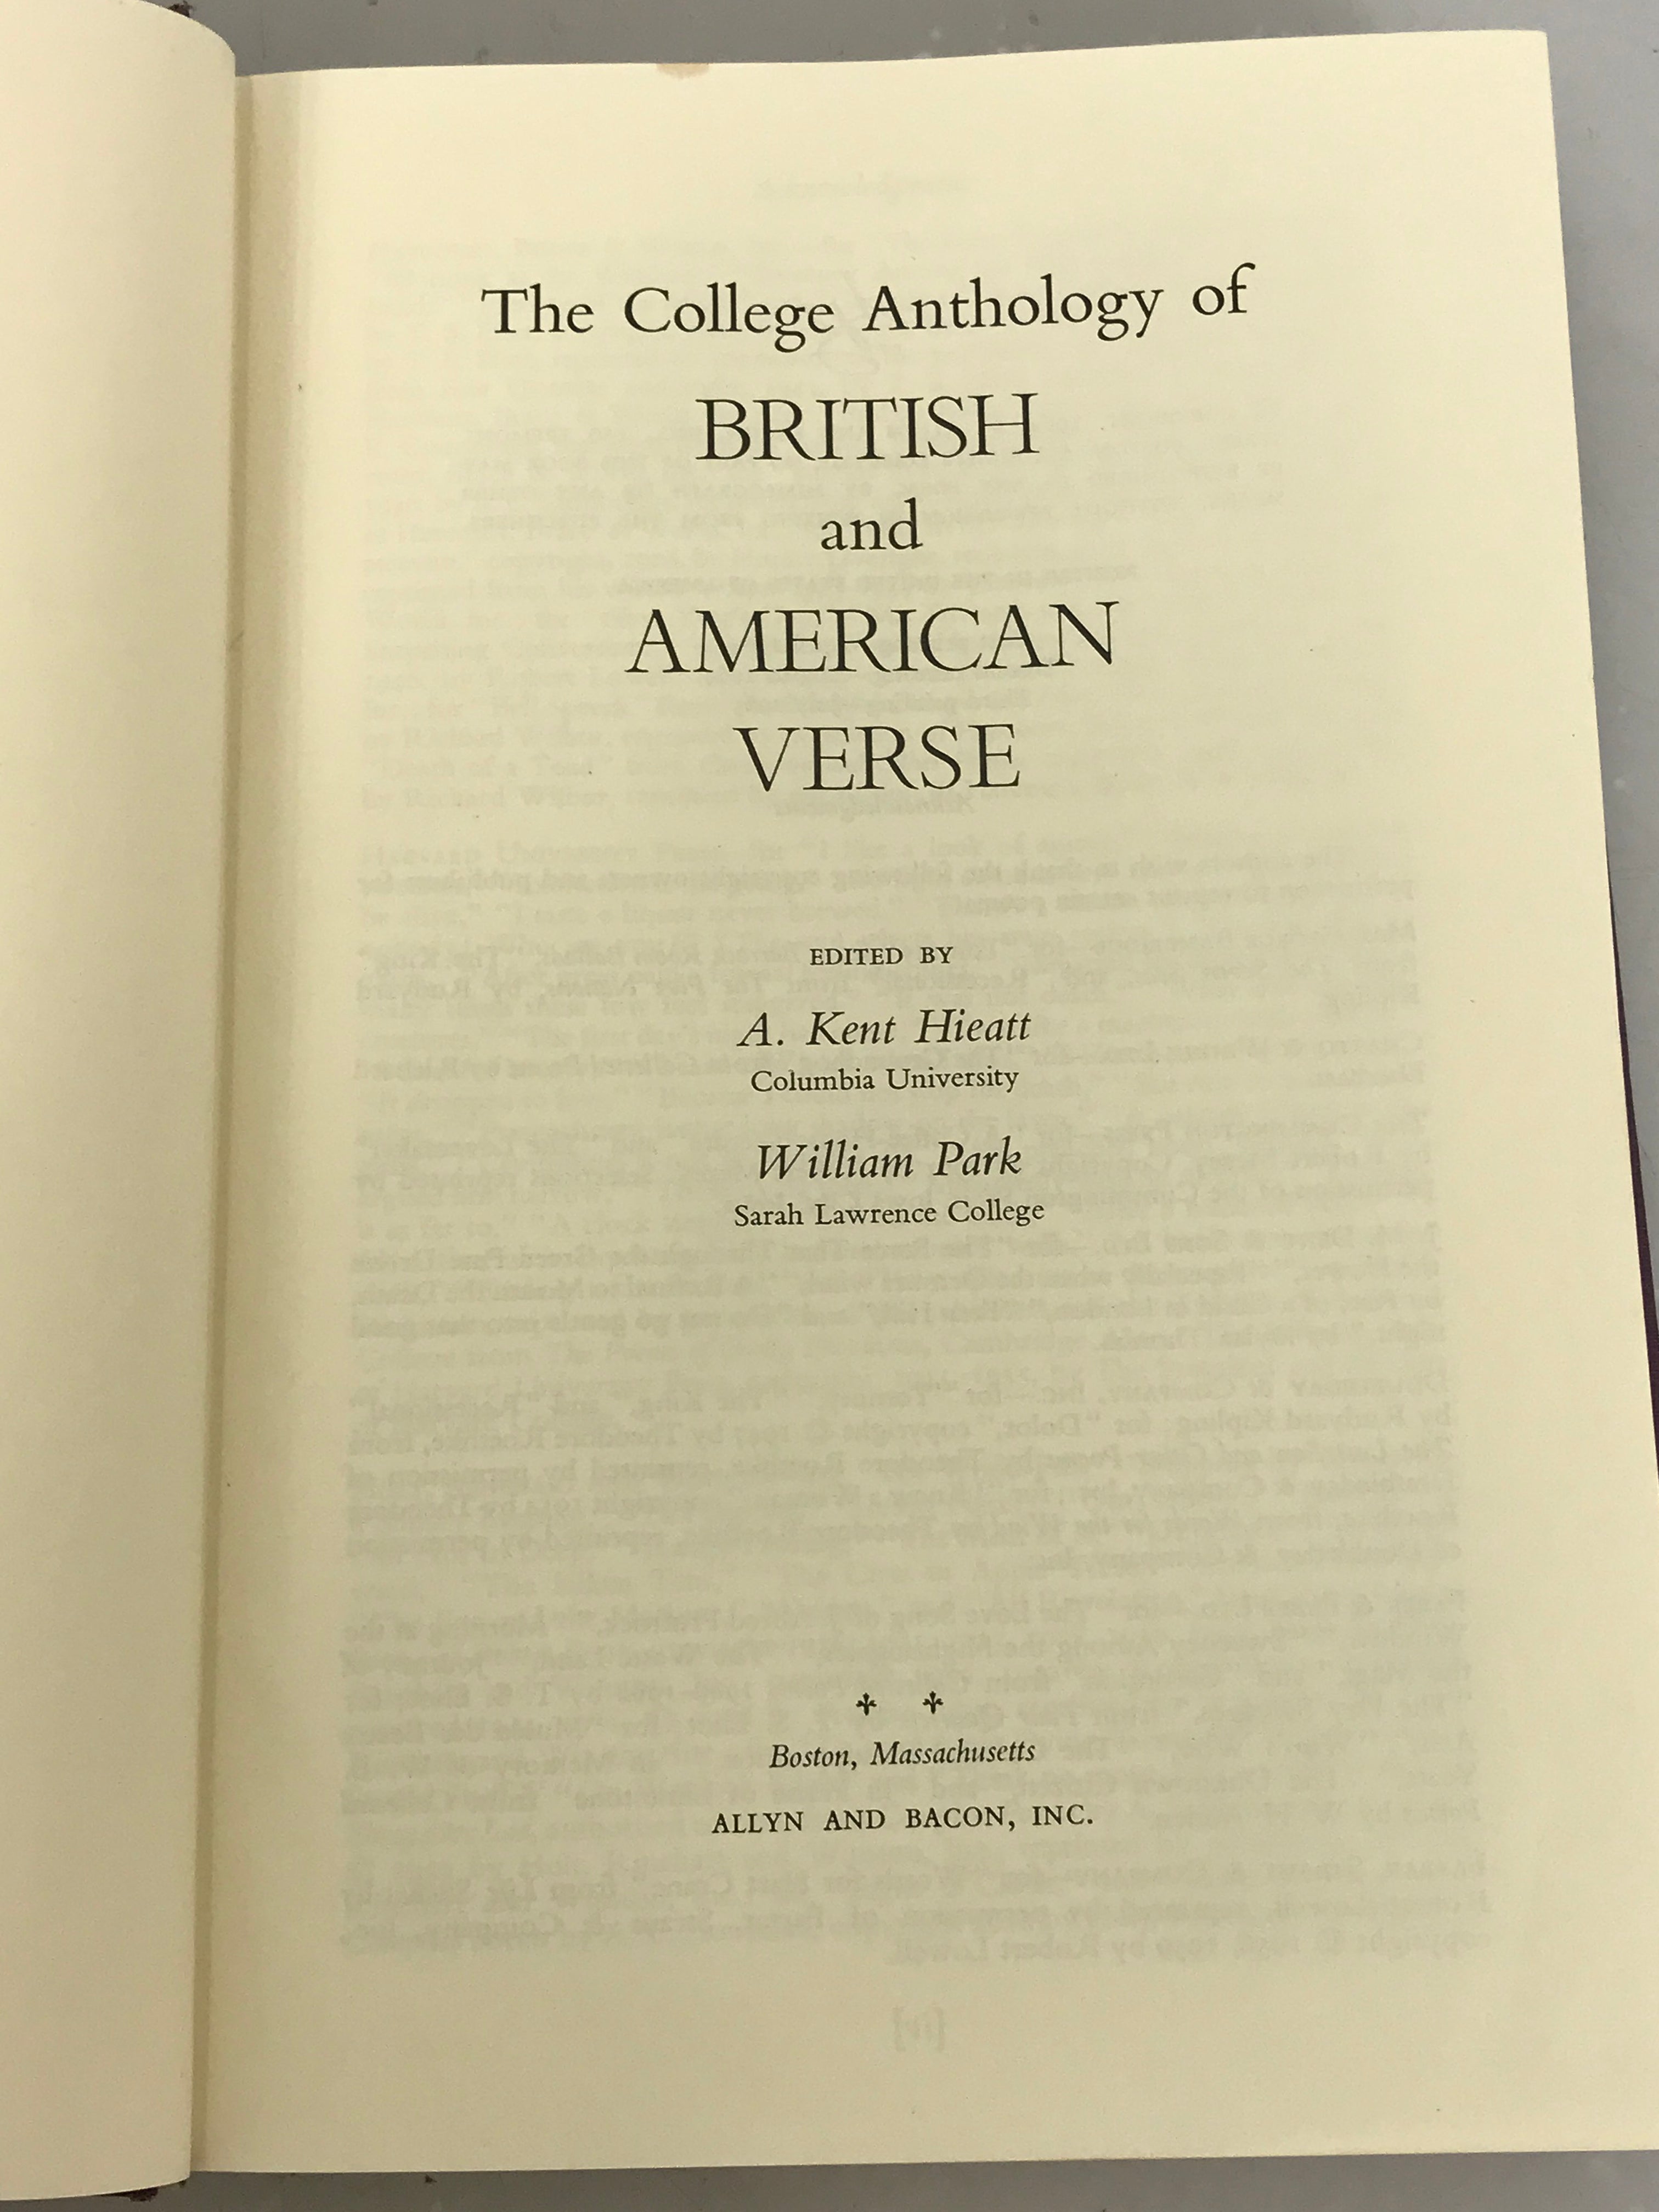 The College Anthology of British and American Verse by Hieatt and Park 1965 HC